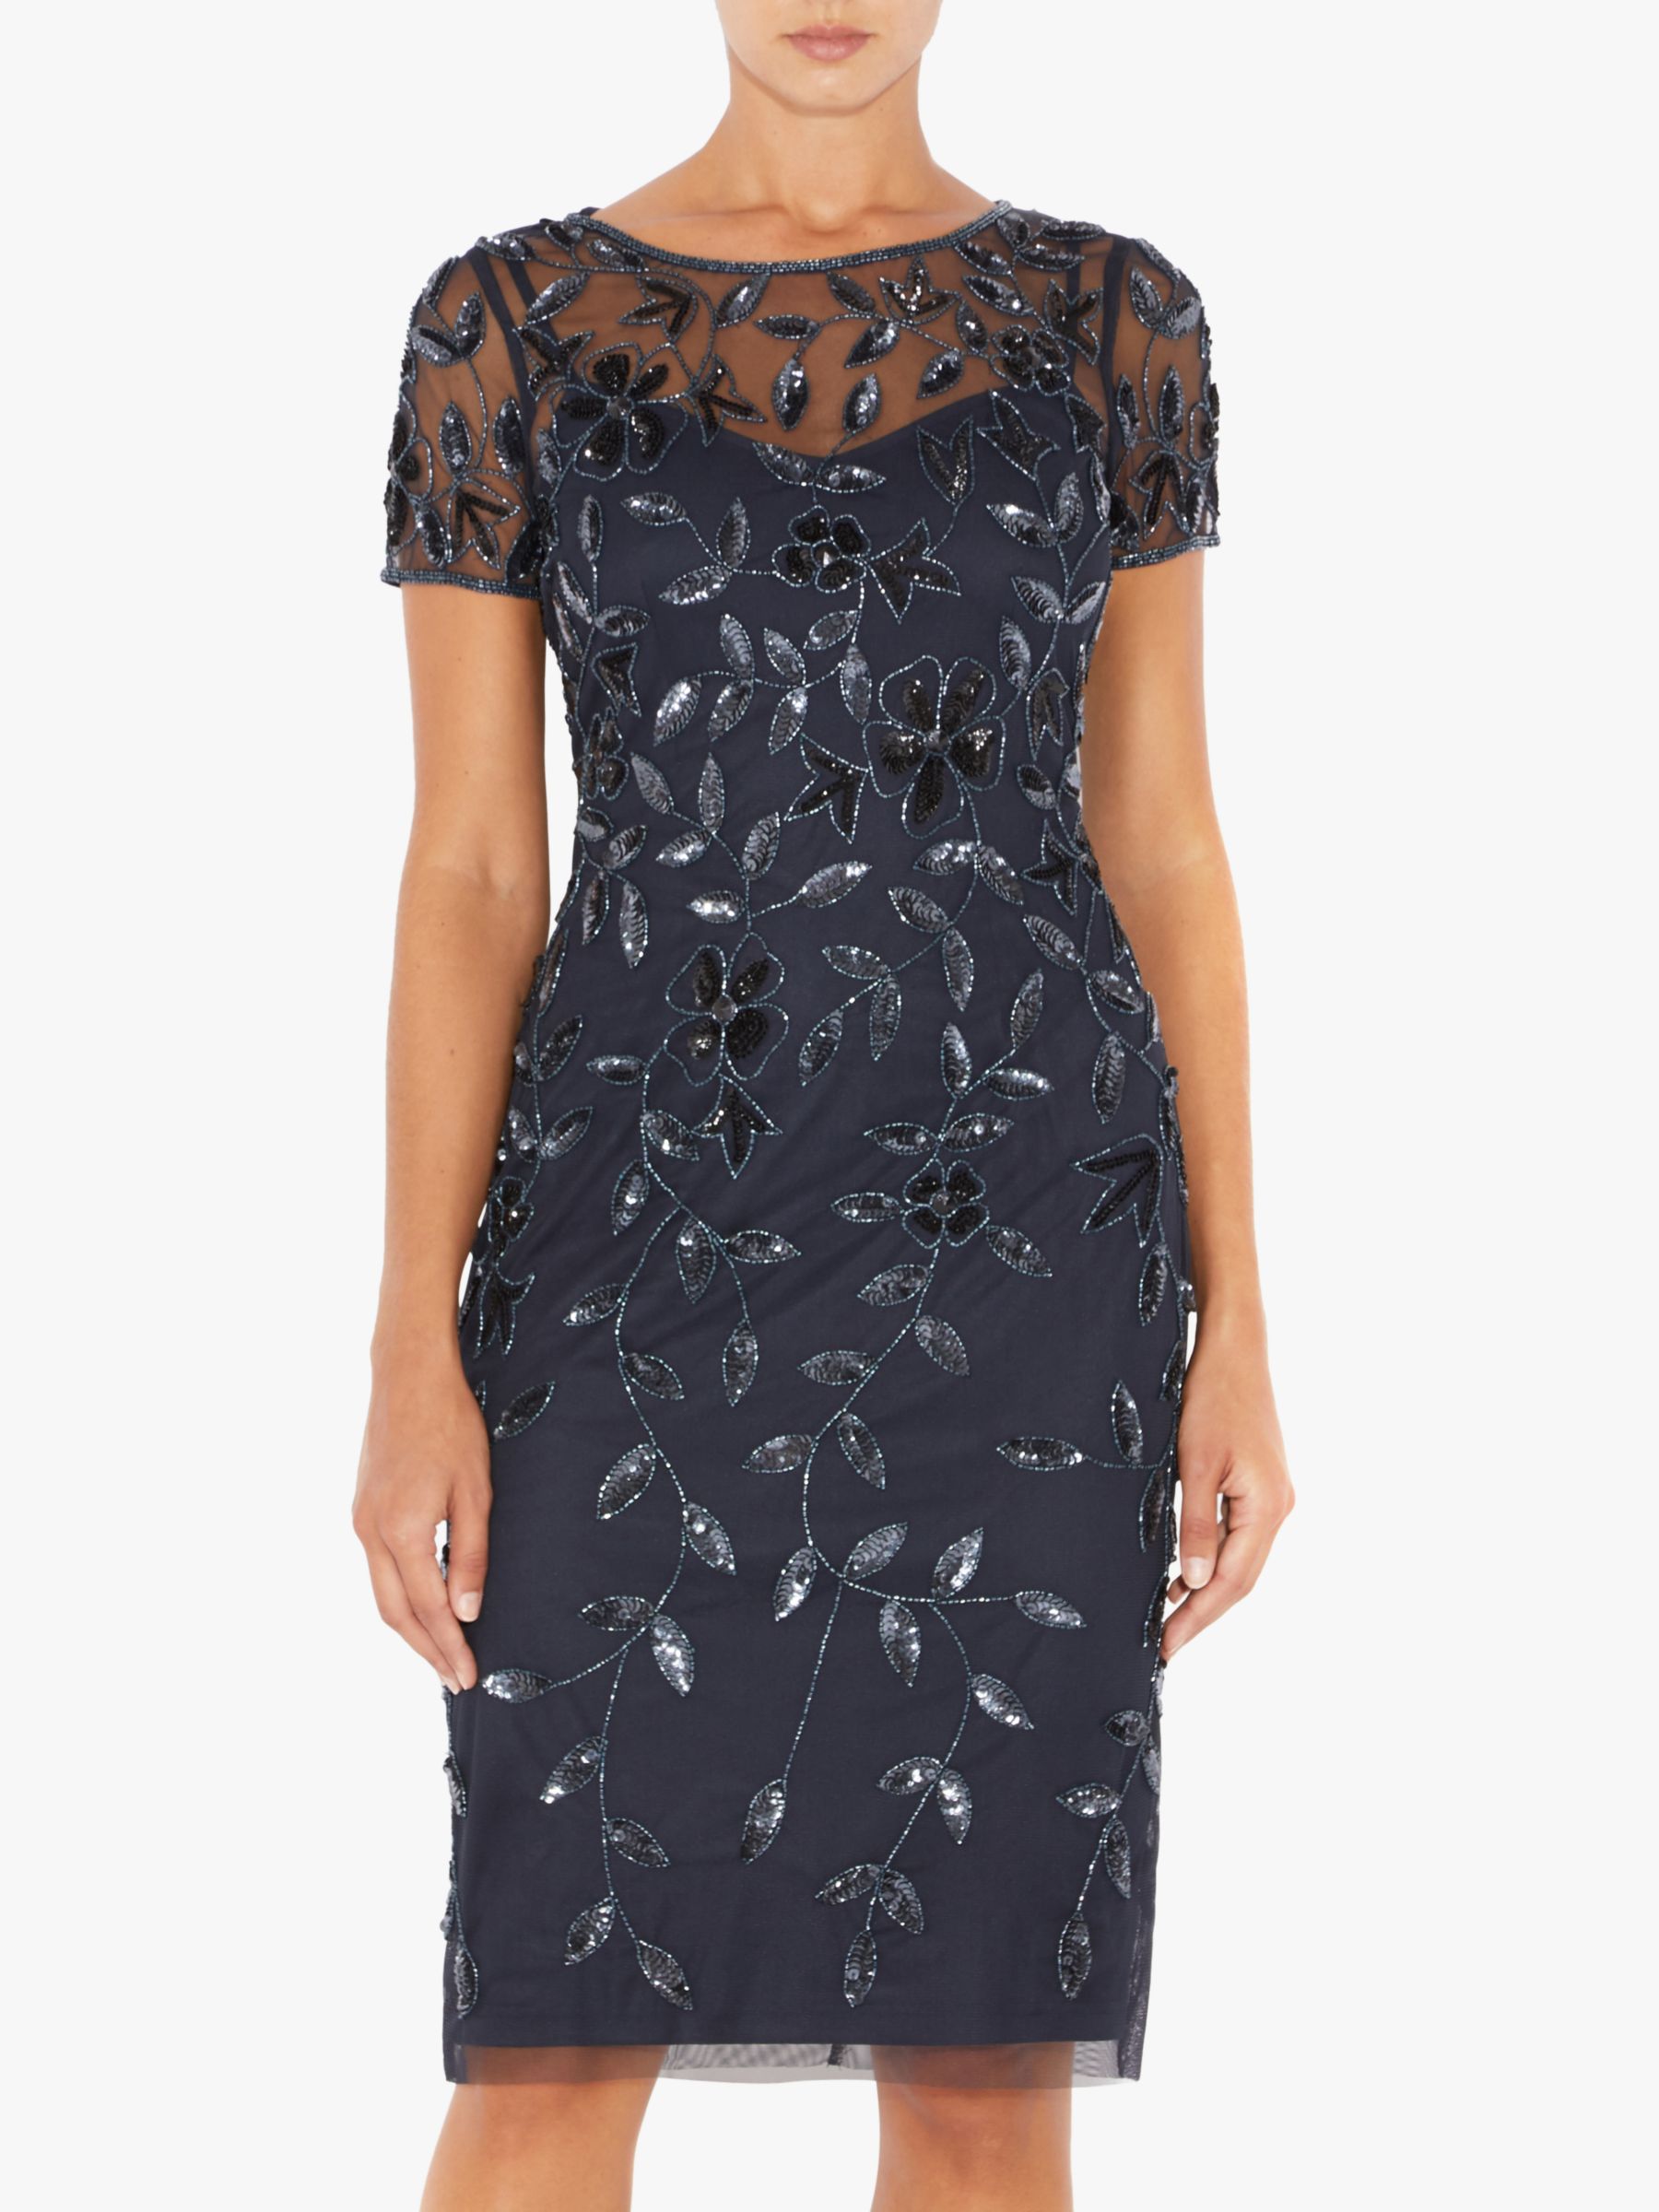 Adrianna Papell Short Sleeve Beaded Floral Dress Blue At John Lewis And Partners